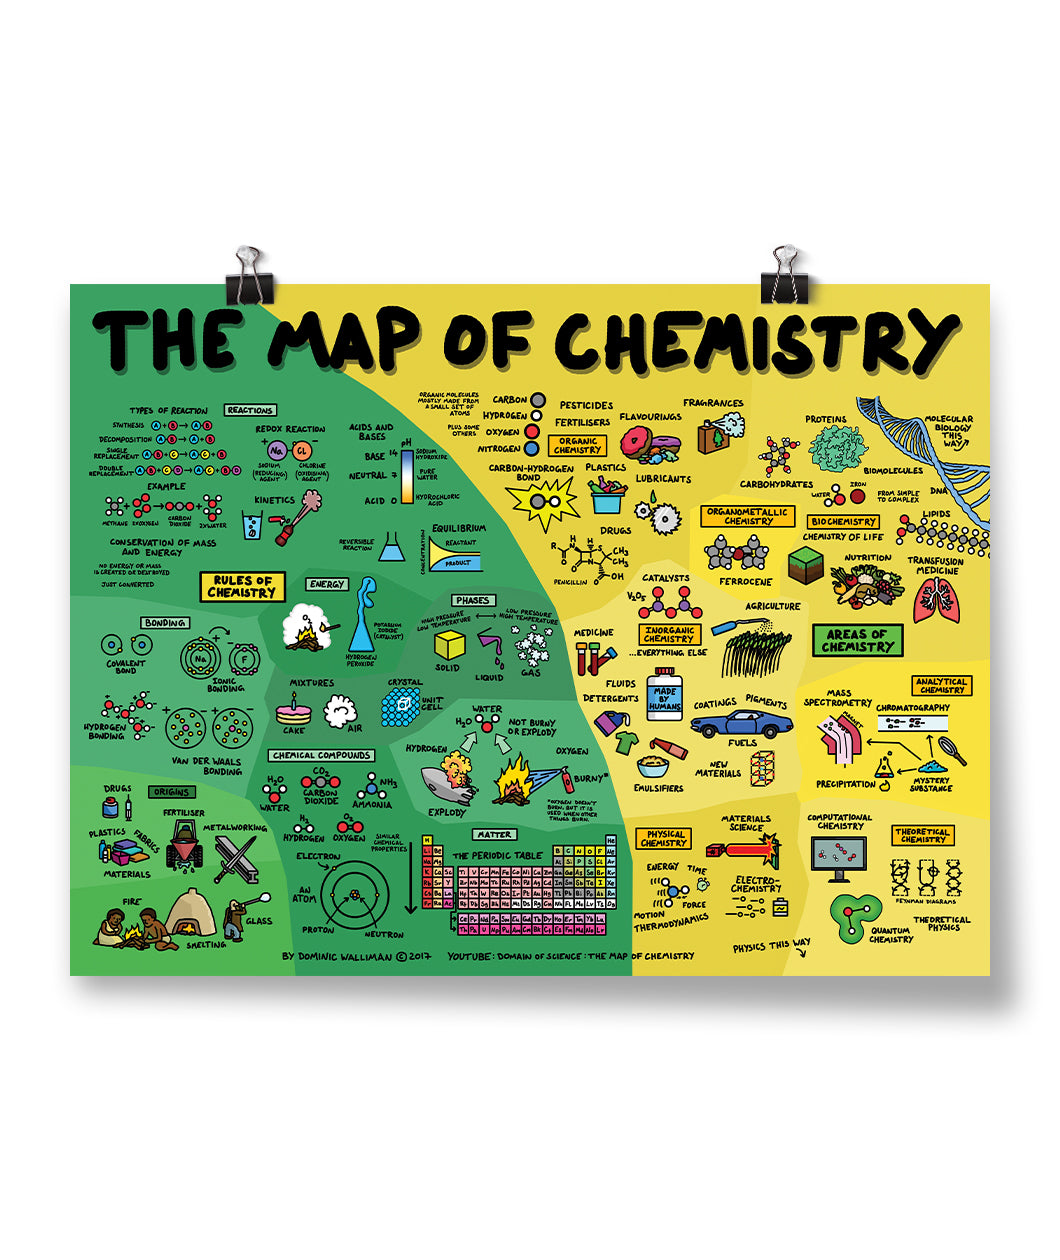 A green and yellow poster covered in text and graphics - by Domain of Science